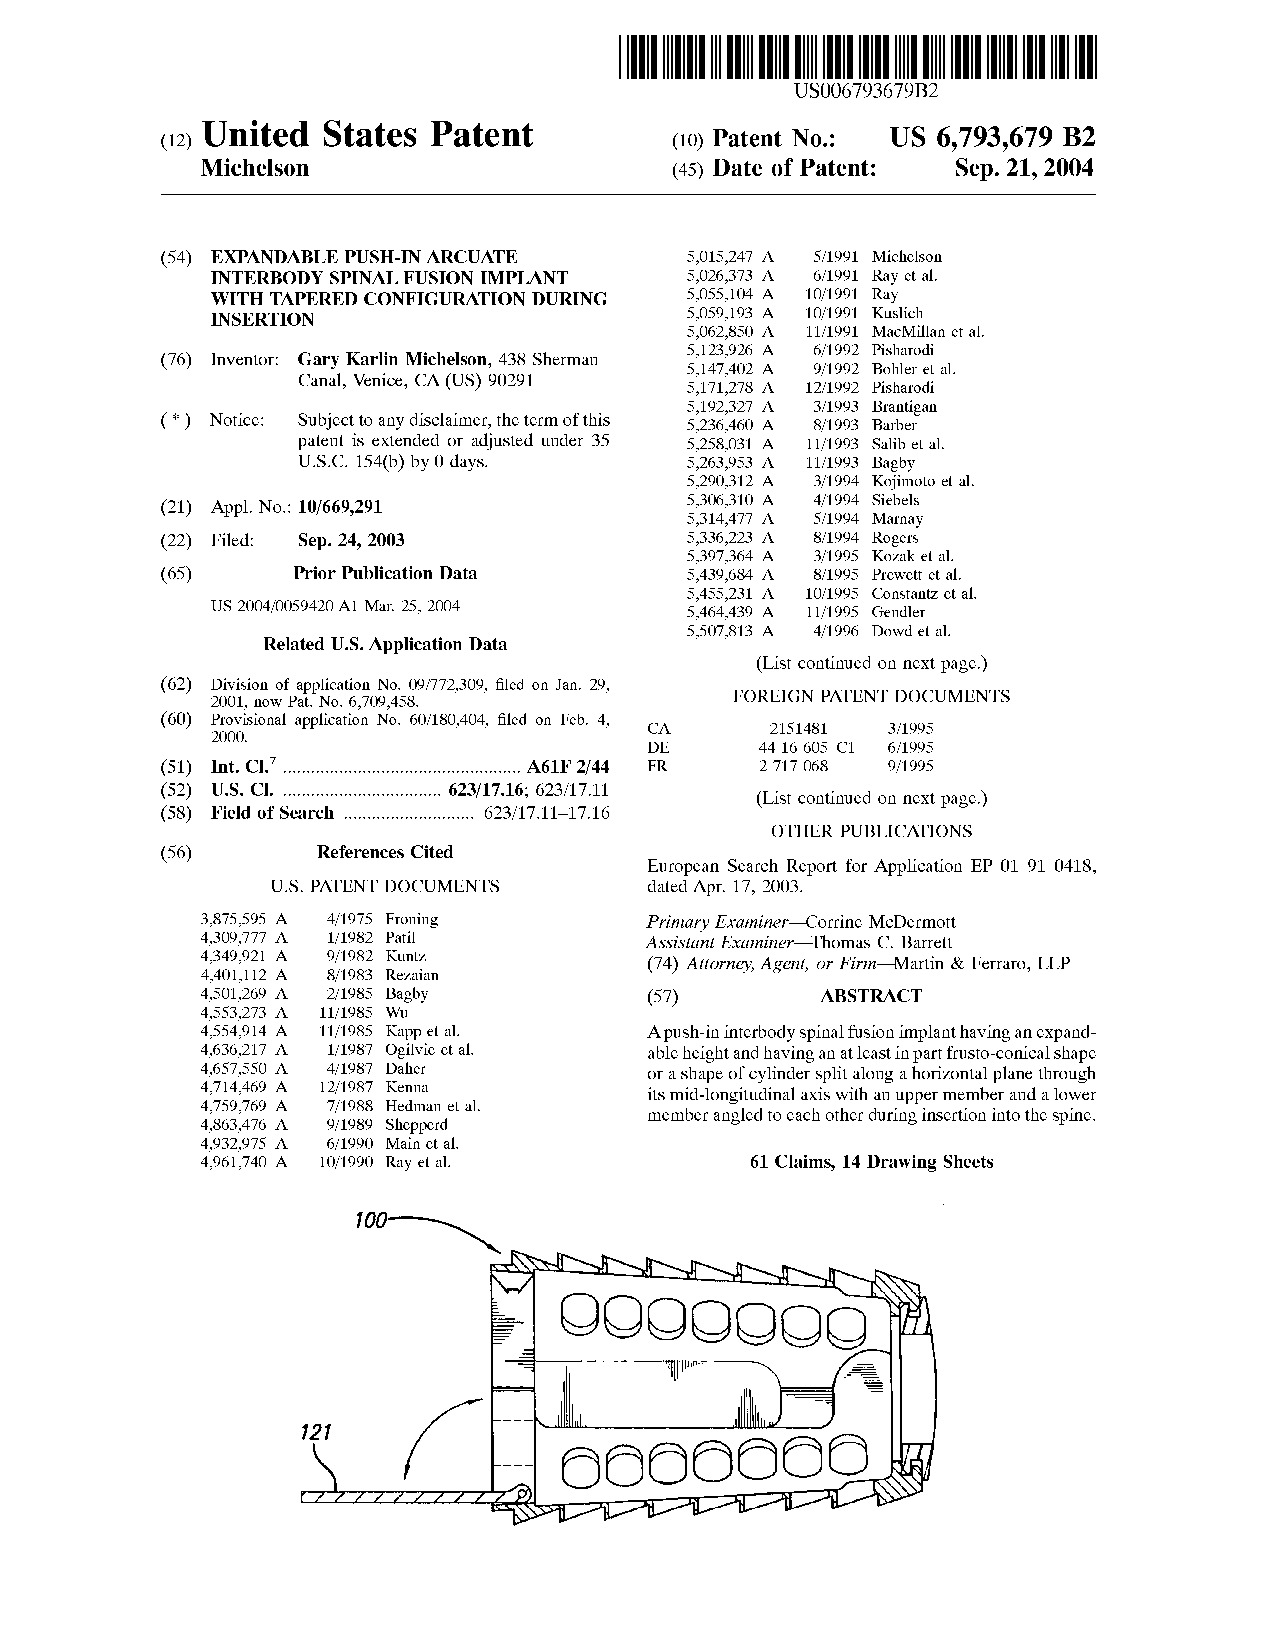 Expandable push-in arcuate interbody spinal fusion implant with tapered     configuration during insertion - Patent 6,793,679